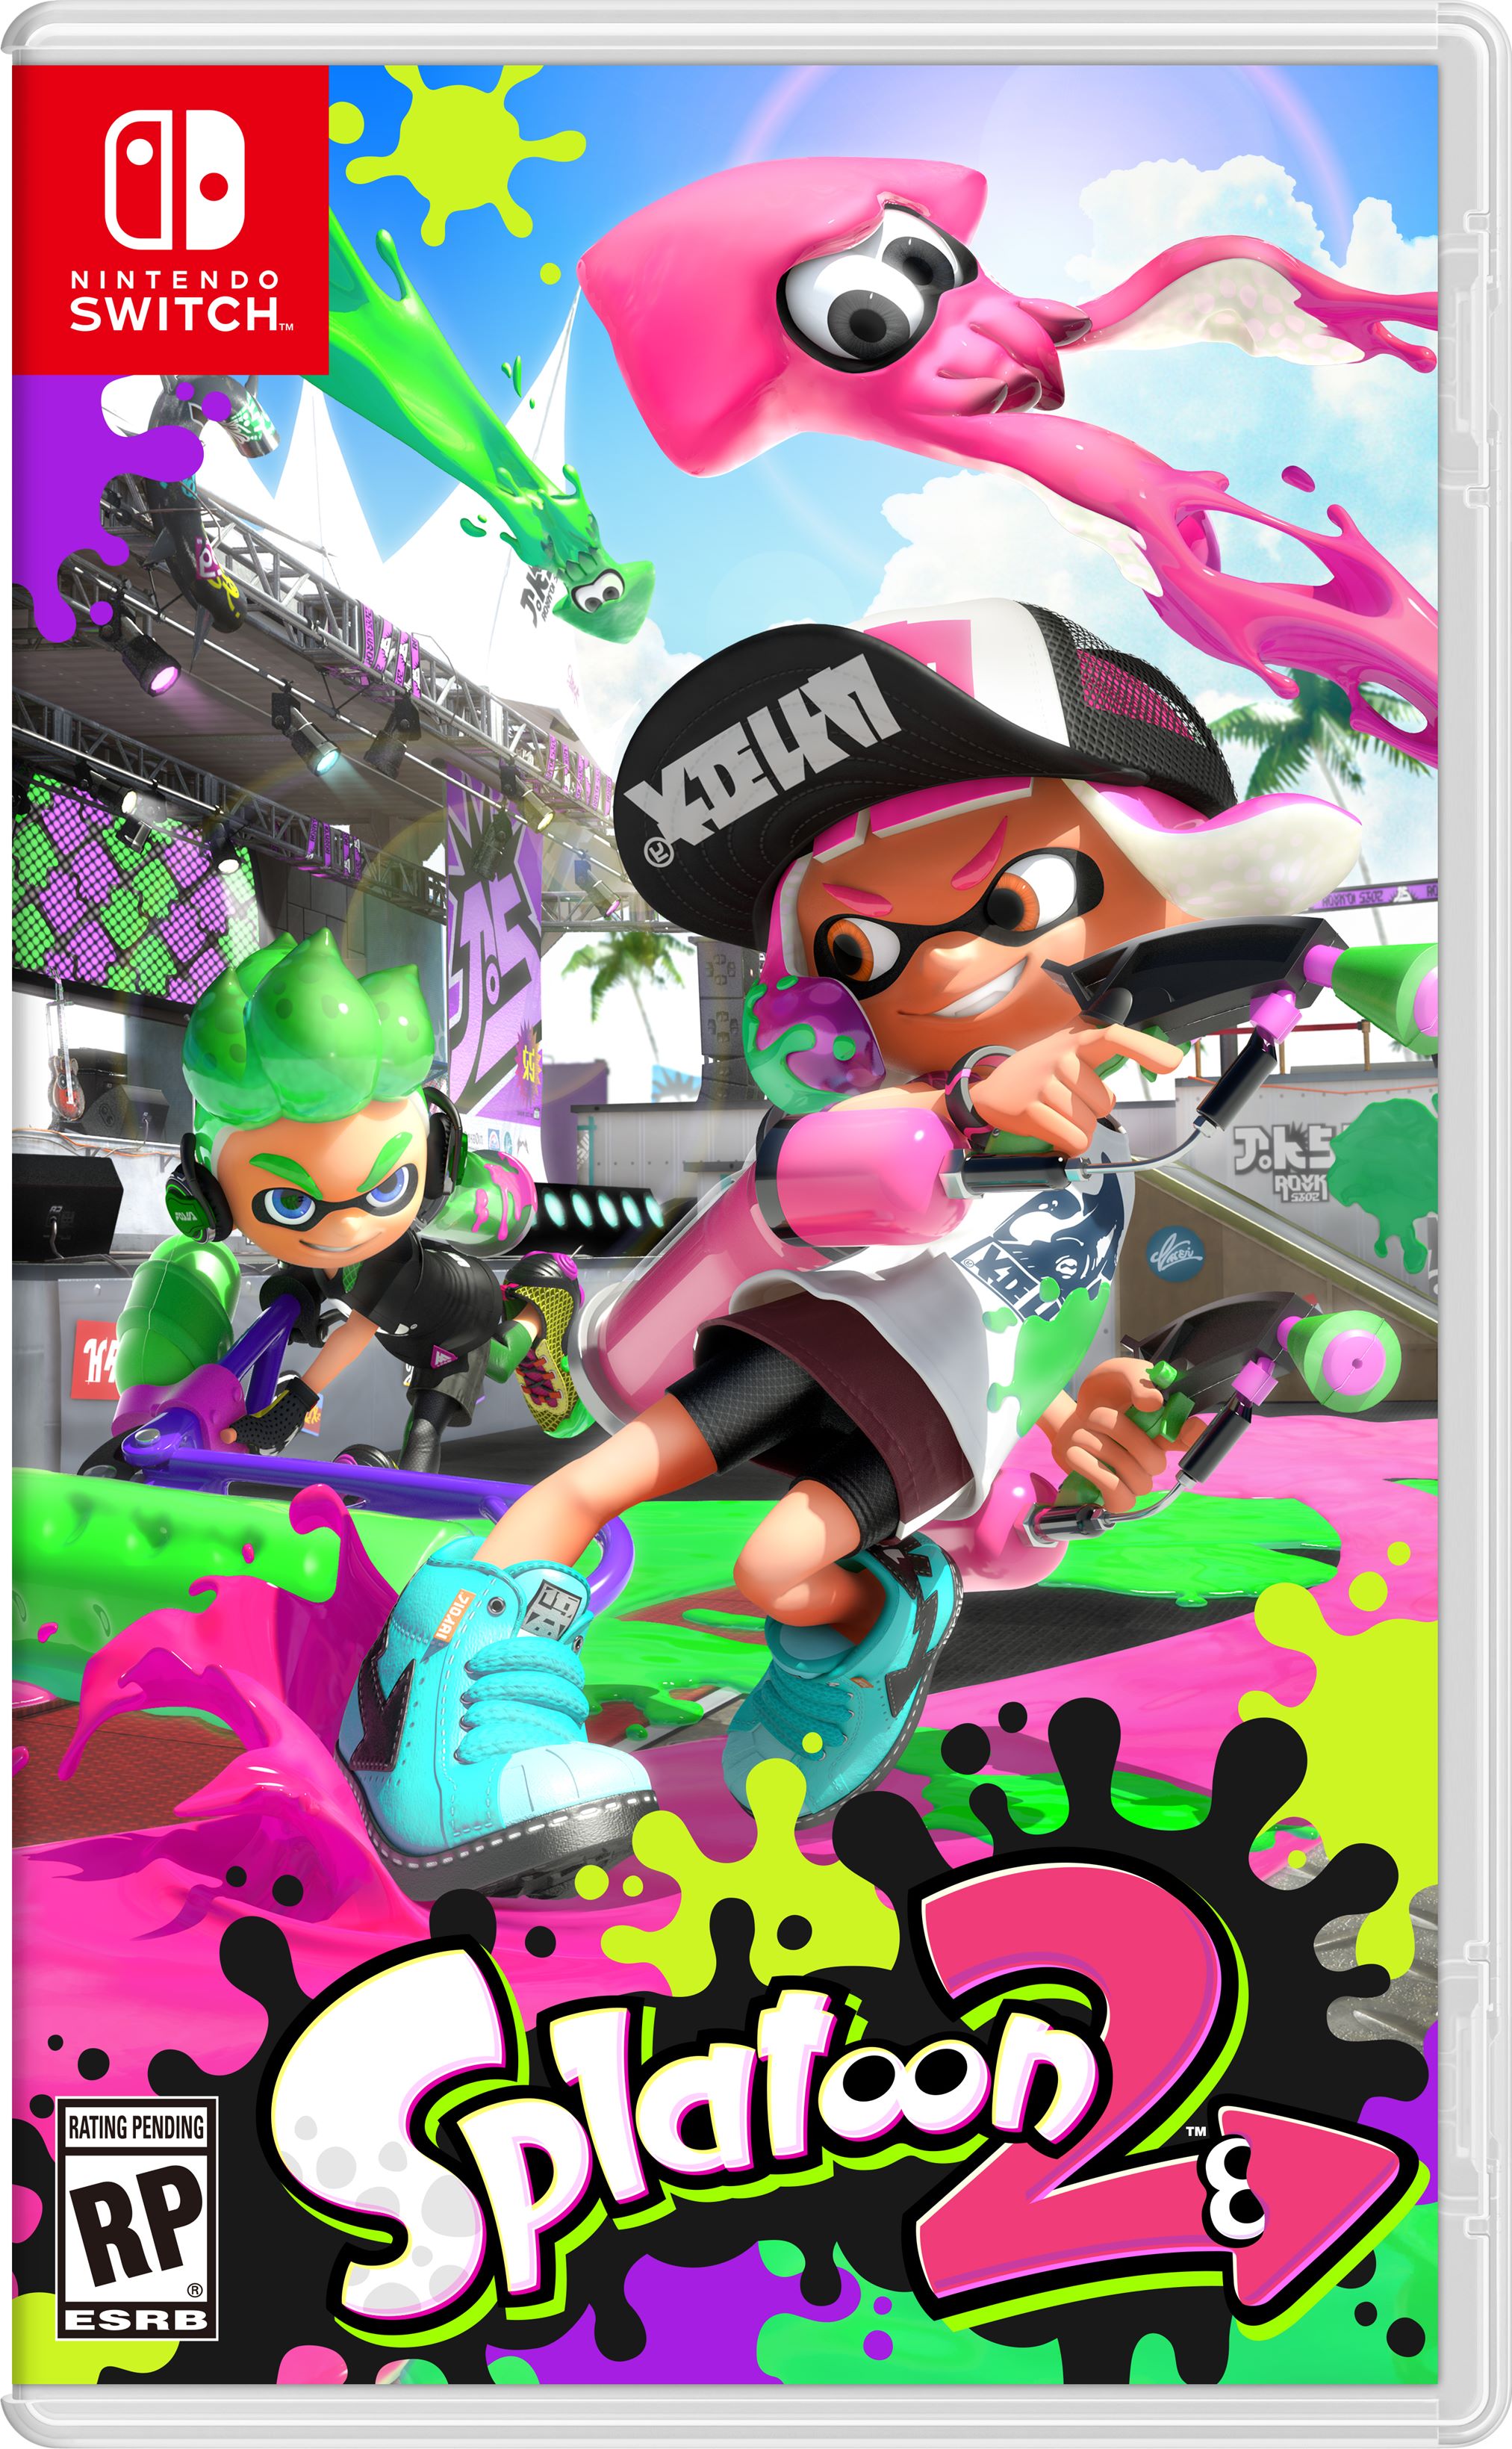 See Splatoon 2's new dual pistols weapon and special abilities in 7 mi...